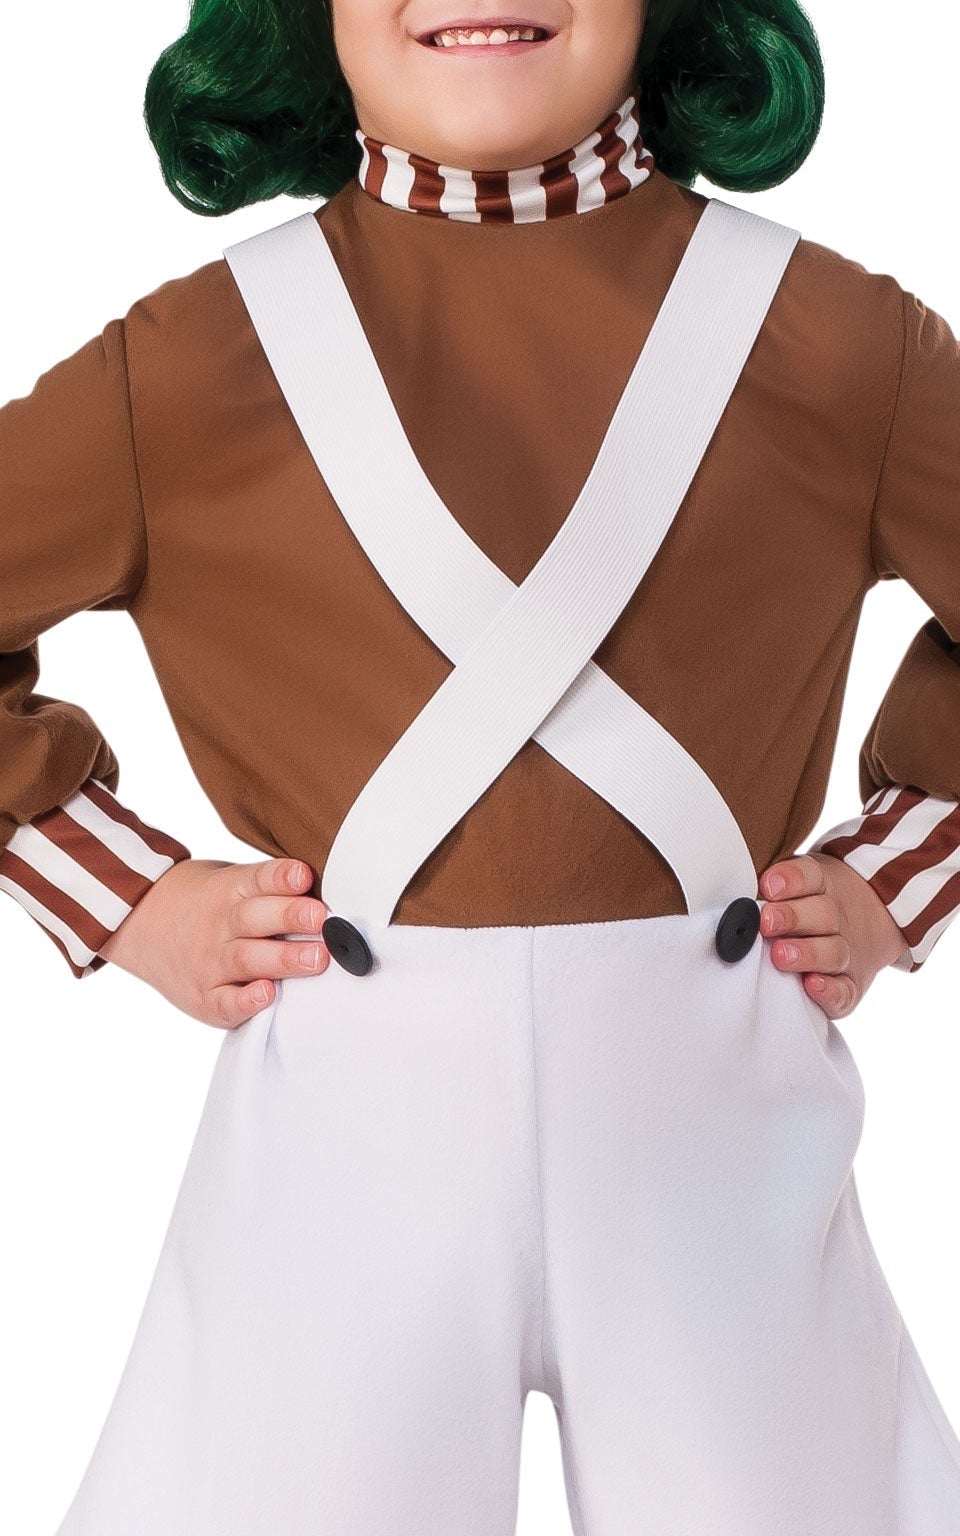 Oompa Loompa Costume Child Charlie and the Chocolate Factory_2